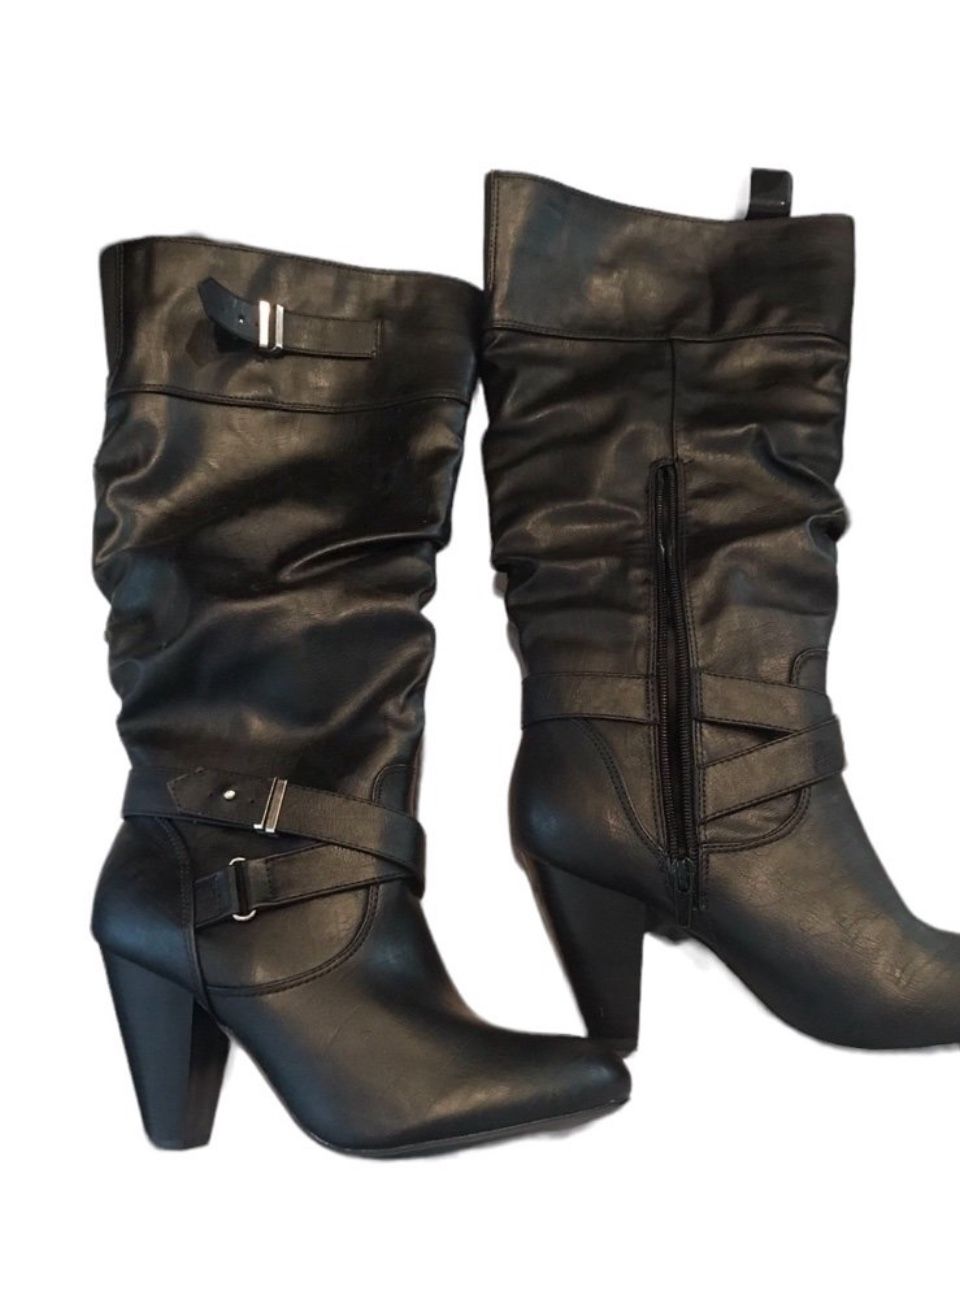 Black Slouch Midcalf Boots Size 8